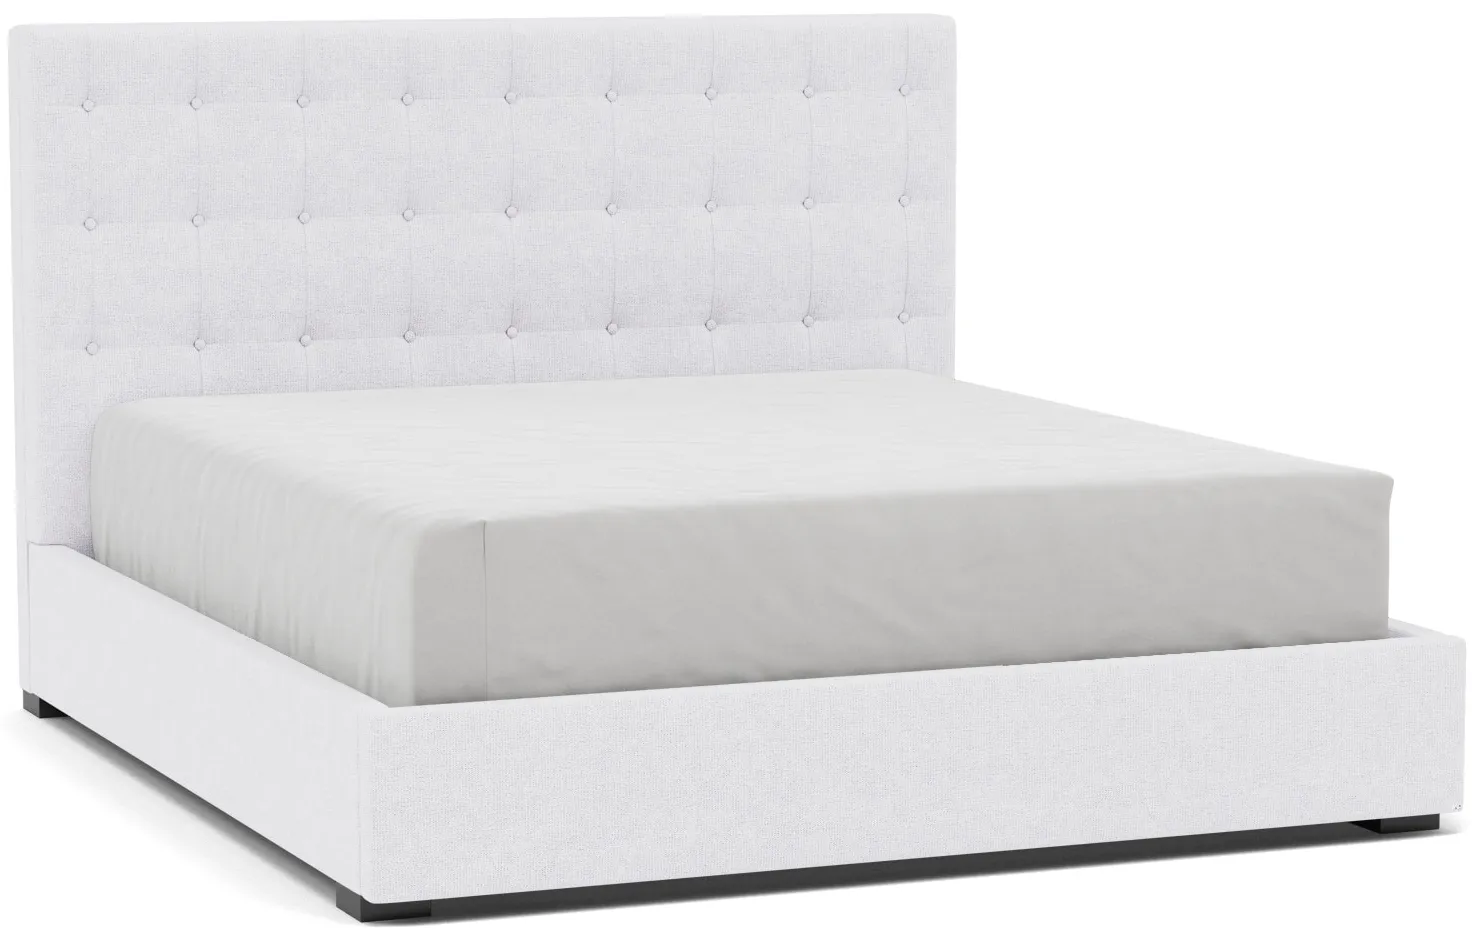 Abby King Upholstered Bed in Tech Arctic